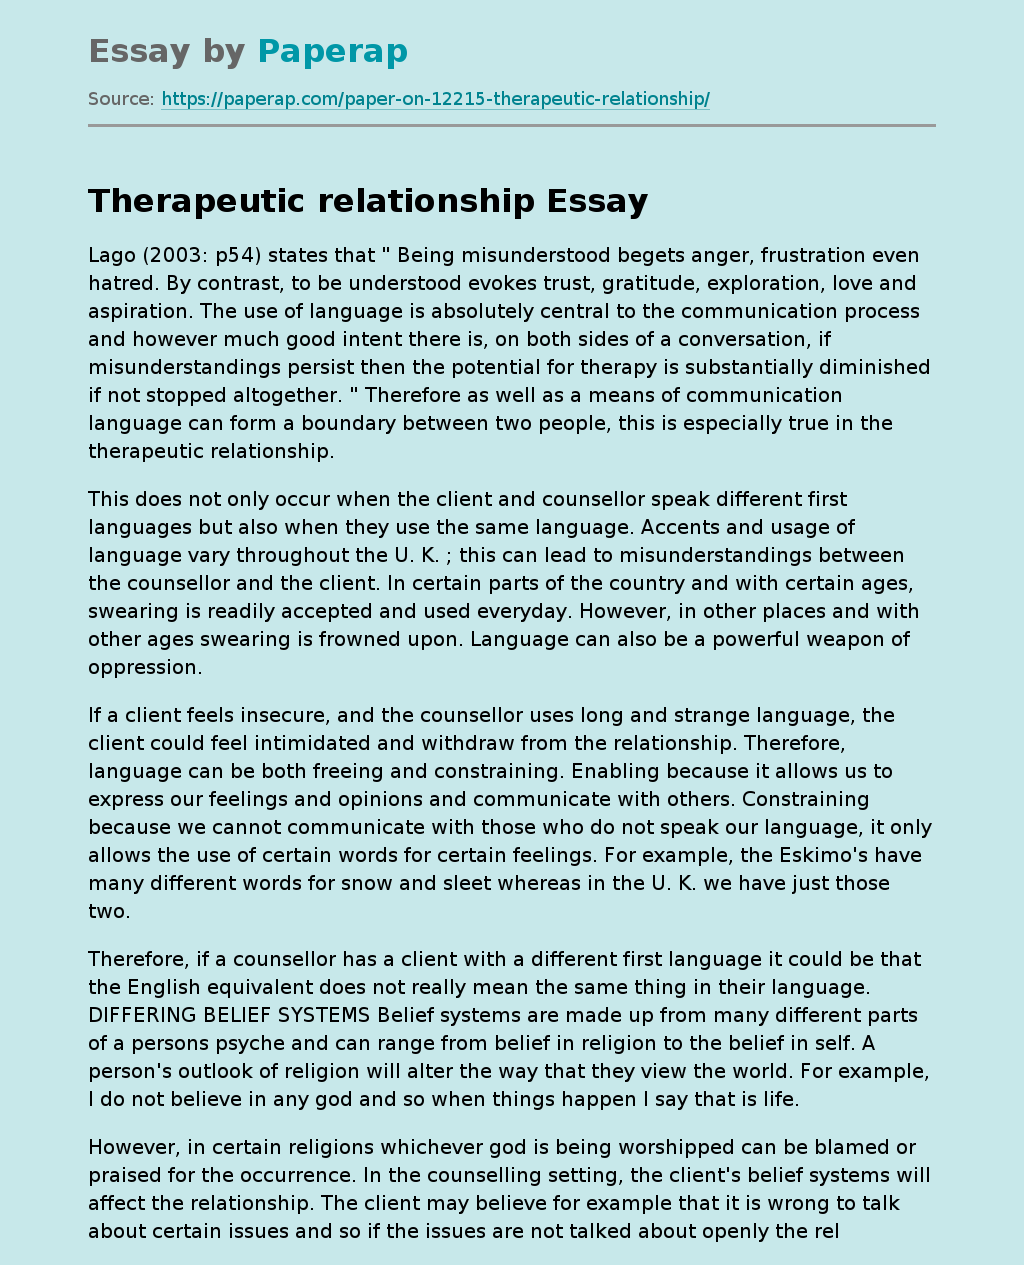 Therapeutic Relationship Between Counselor and Client